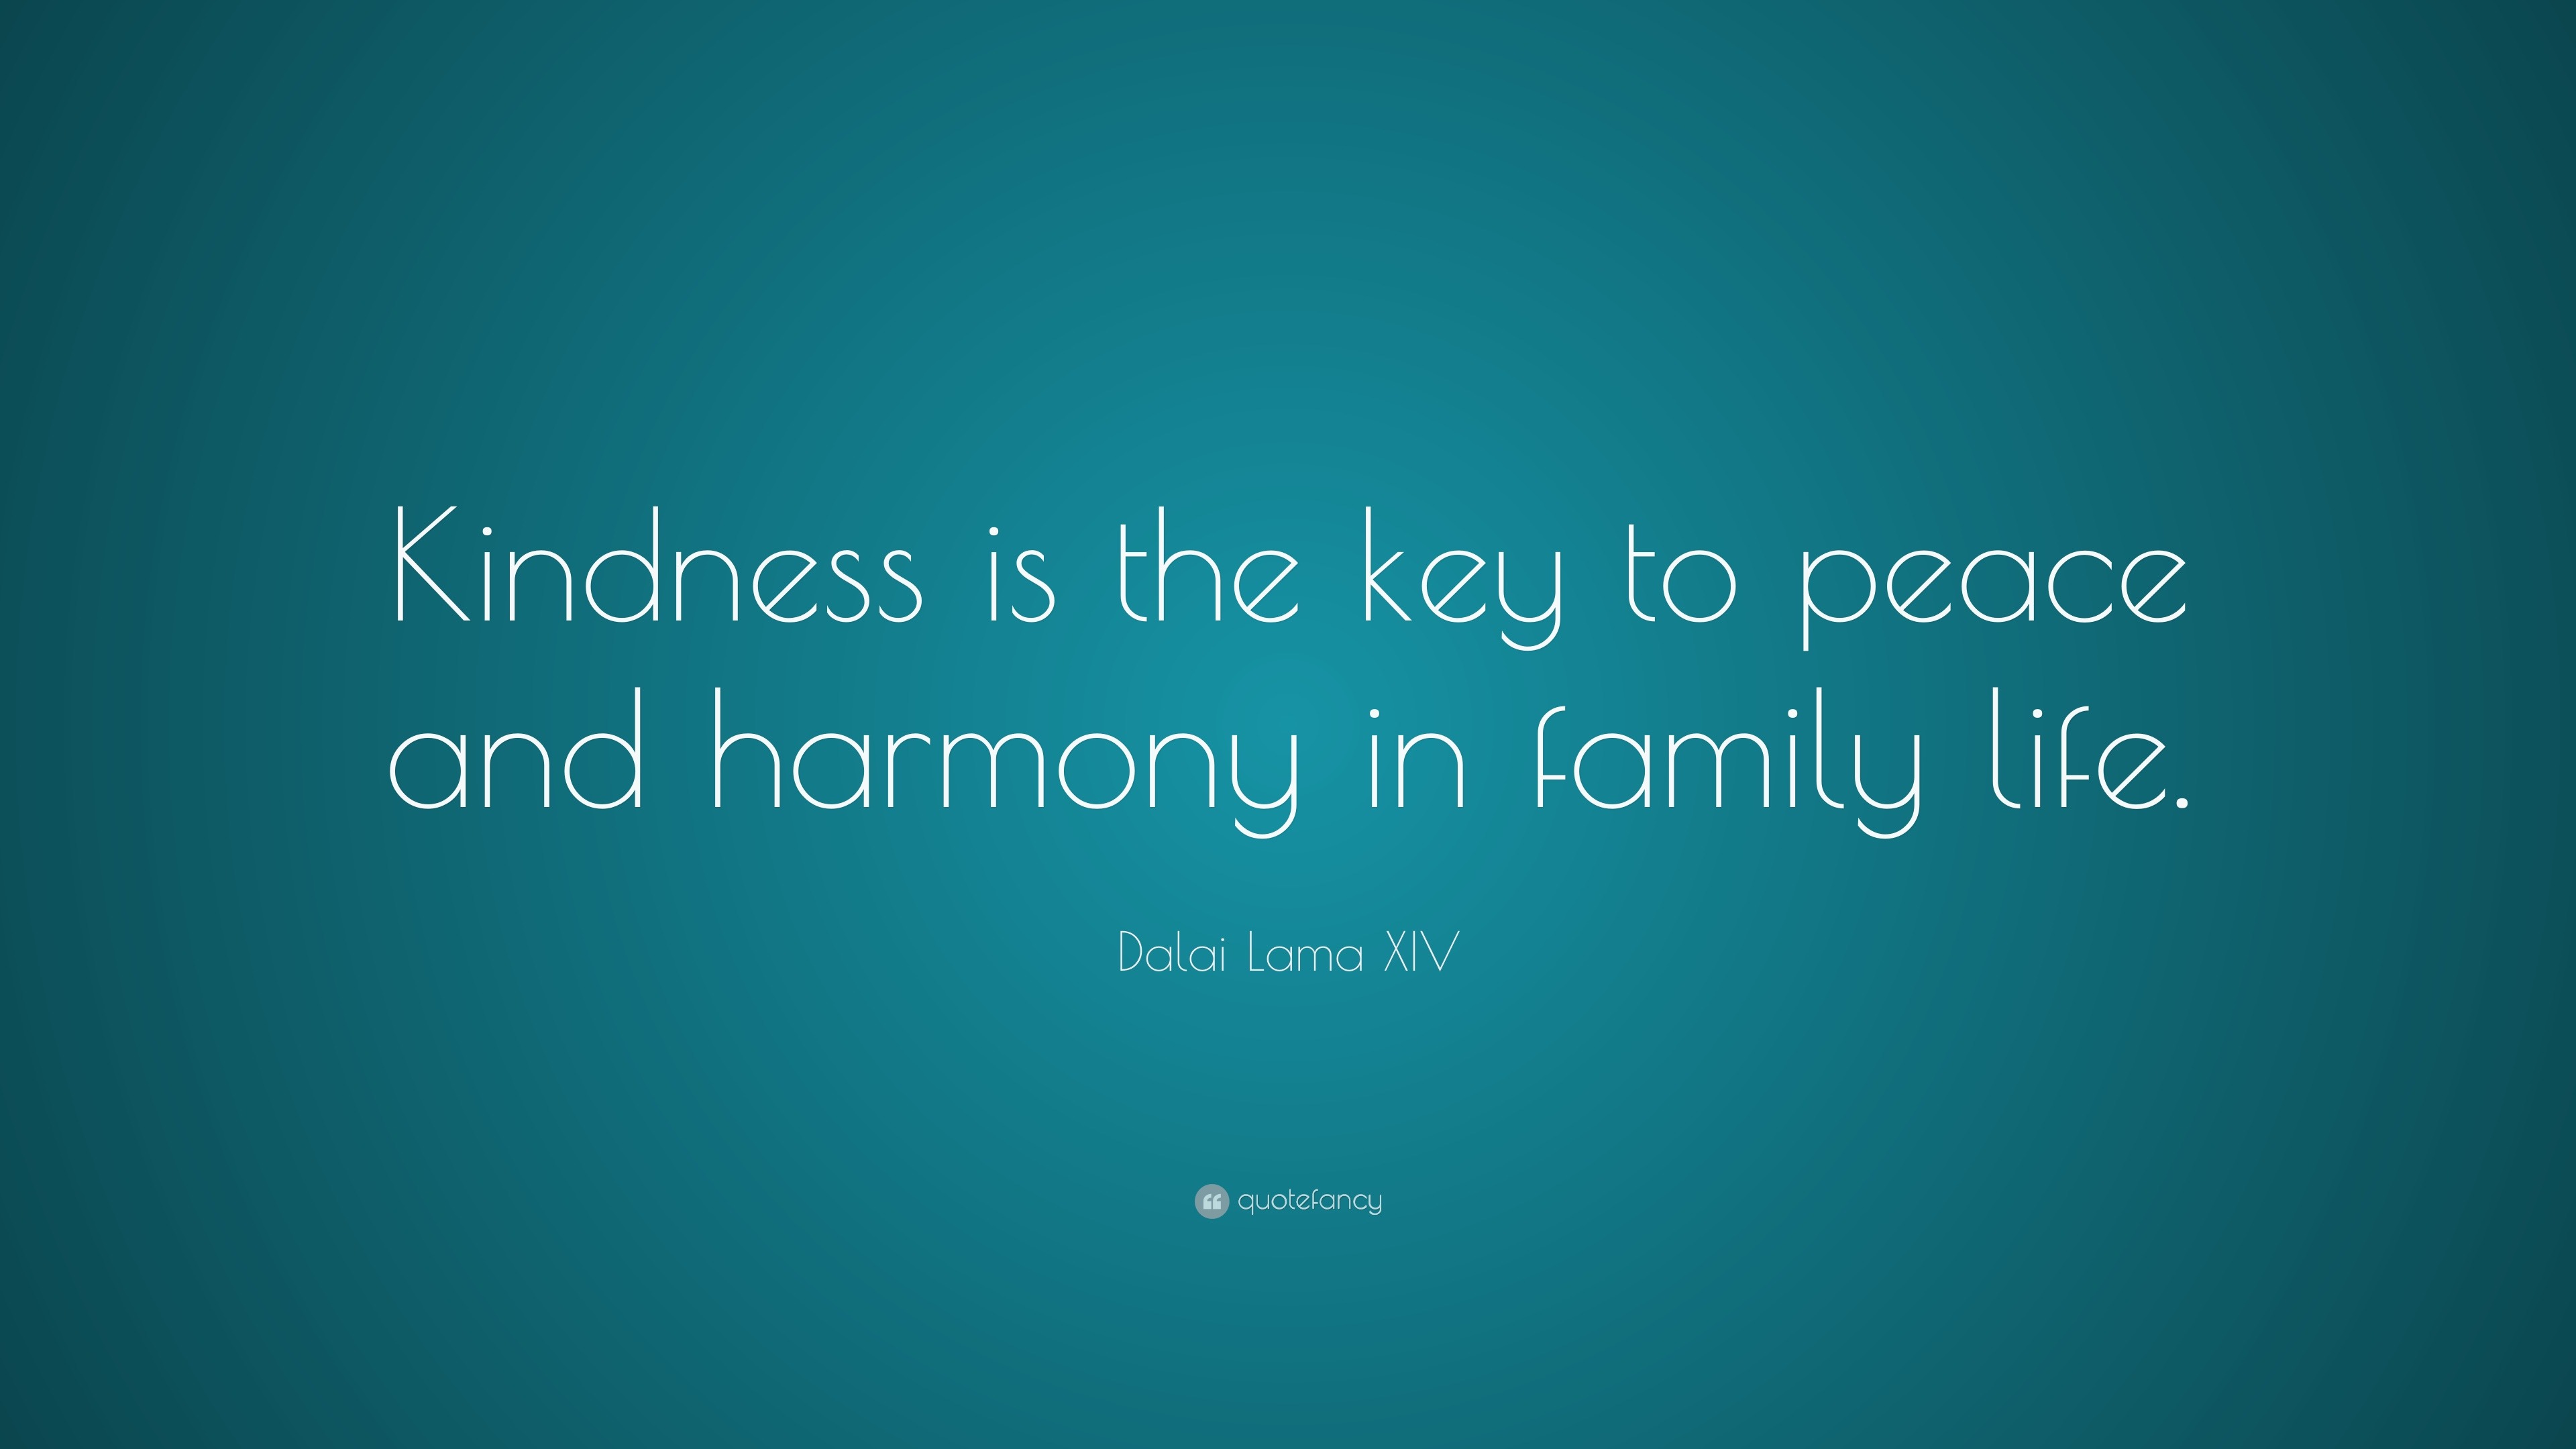 14th dalai lama quote about kindness